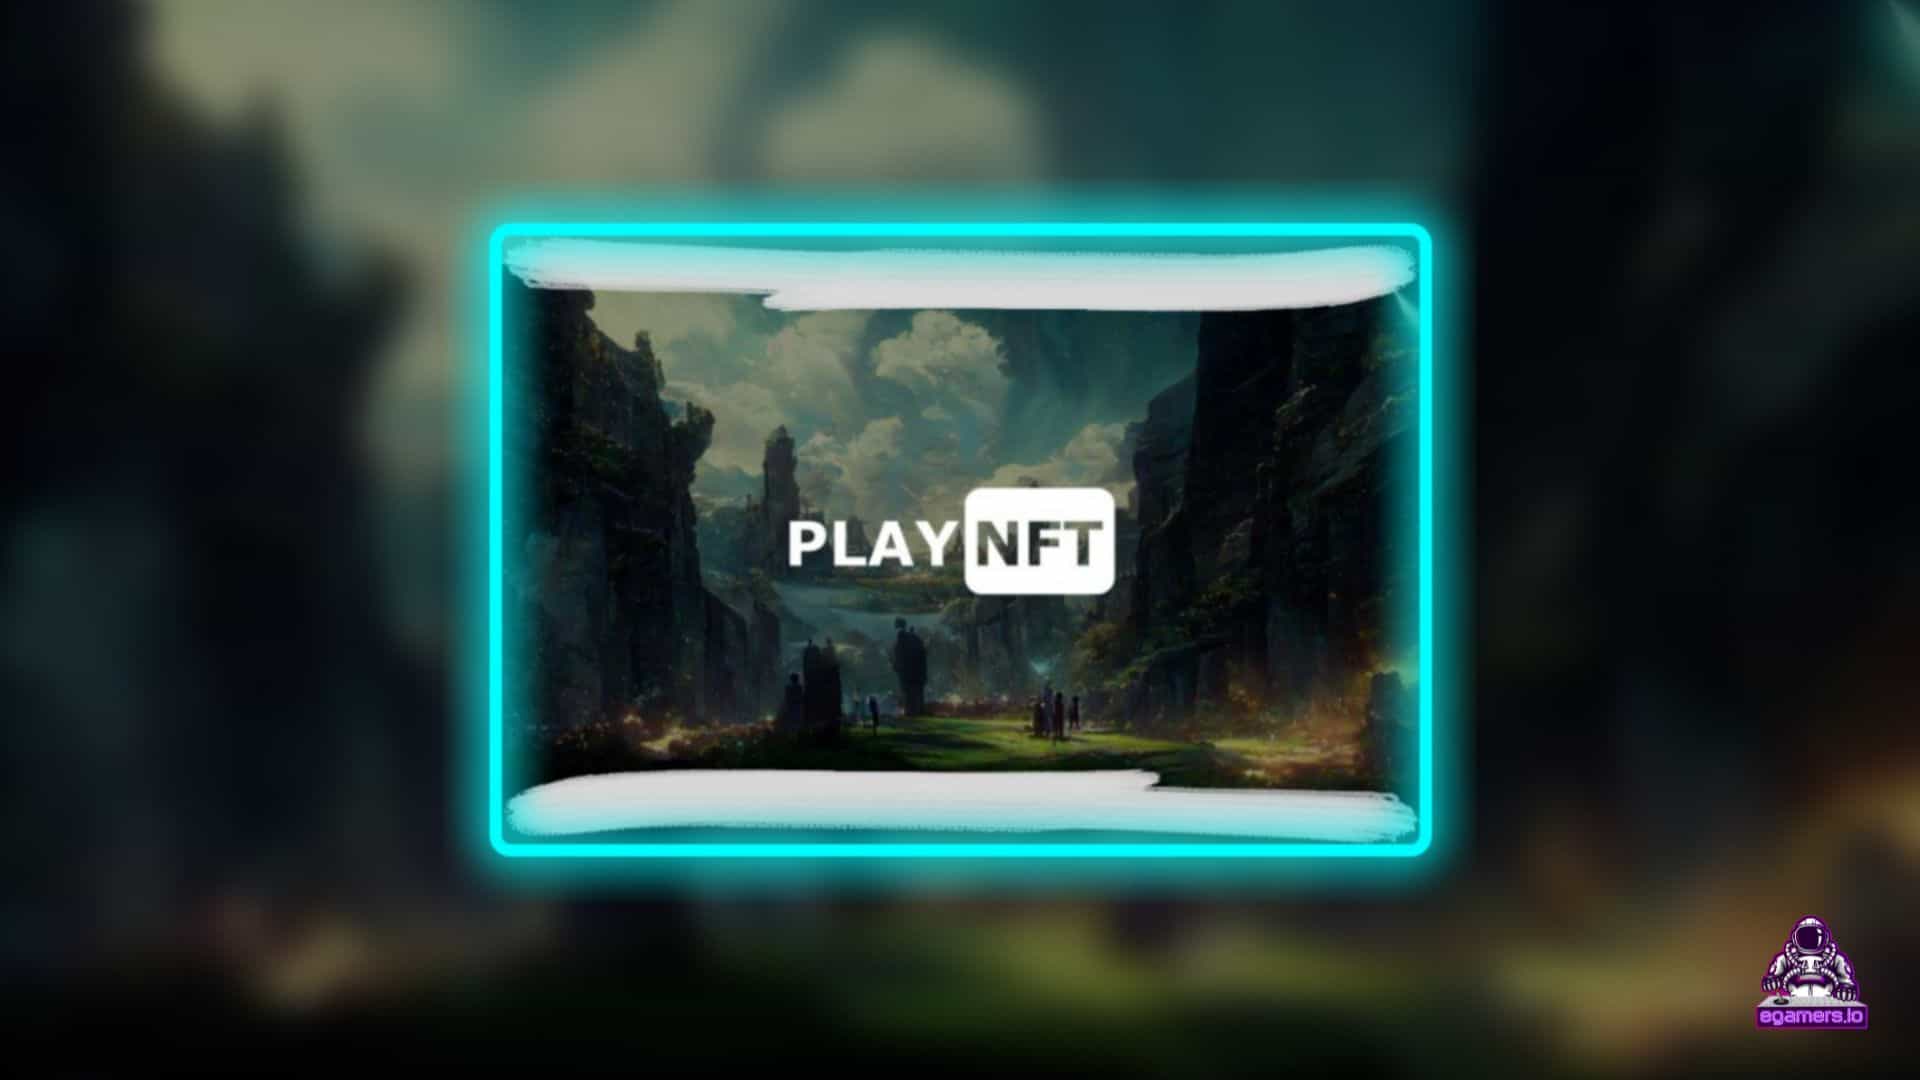 PlayNFT Launches NFT Marketplace For Twitch & YouTube Streamers Worldwide